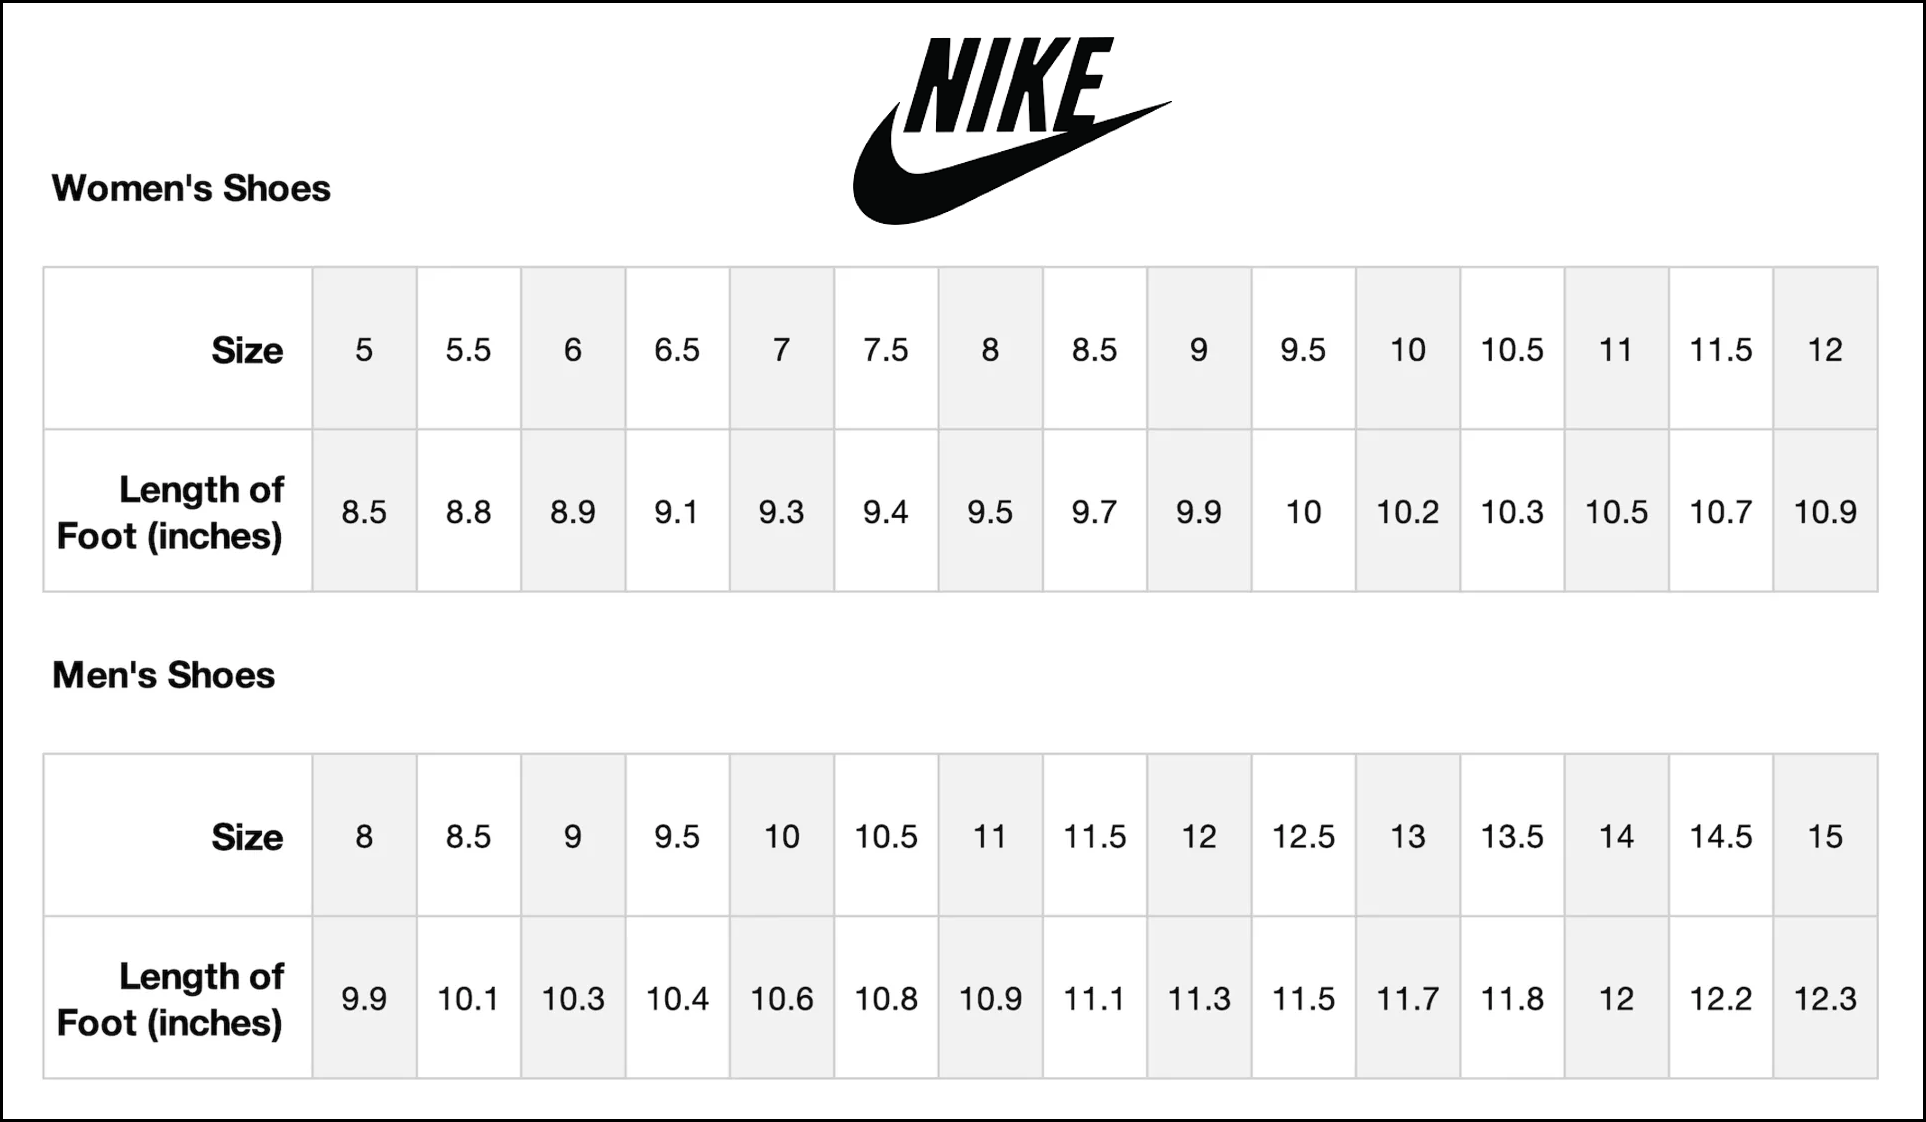 Nike Sizing vs Vans [Know How Their Size & Fit Differs]